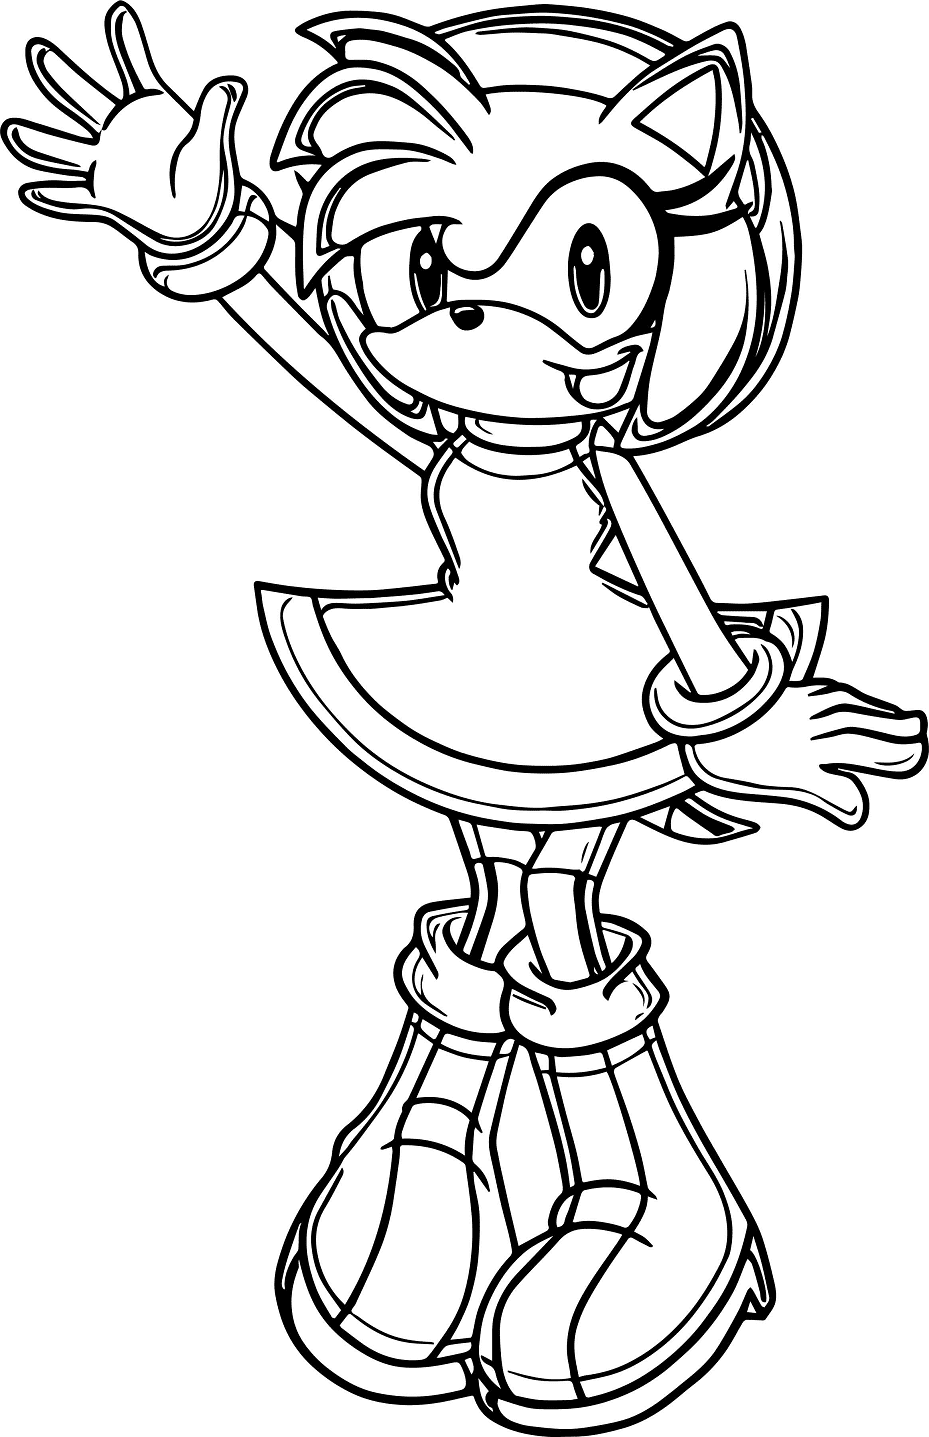 Amy Rose Hi Coloring Pages